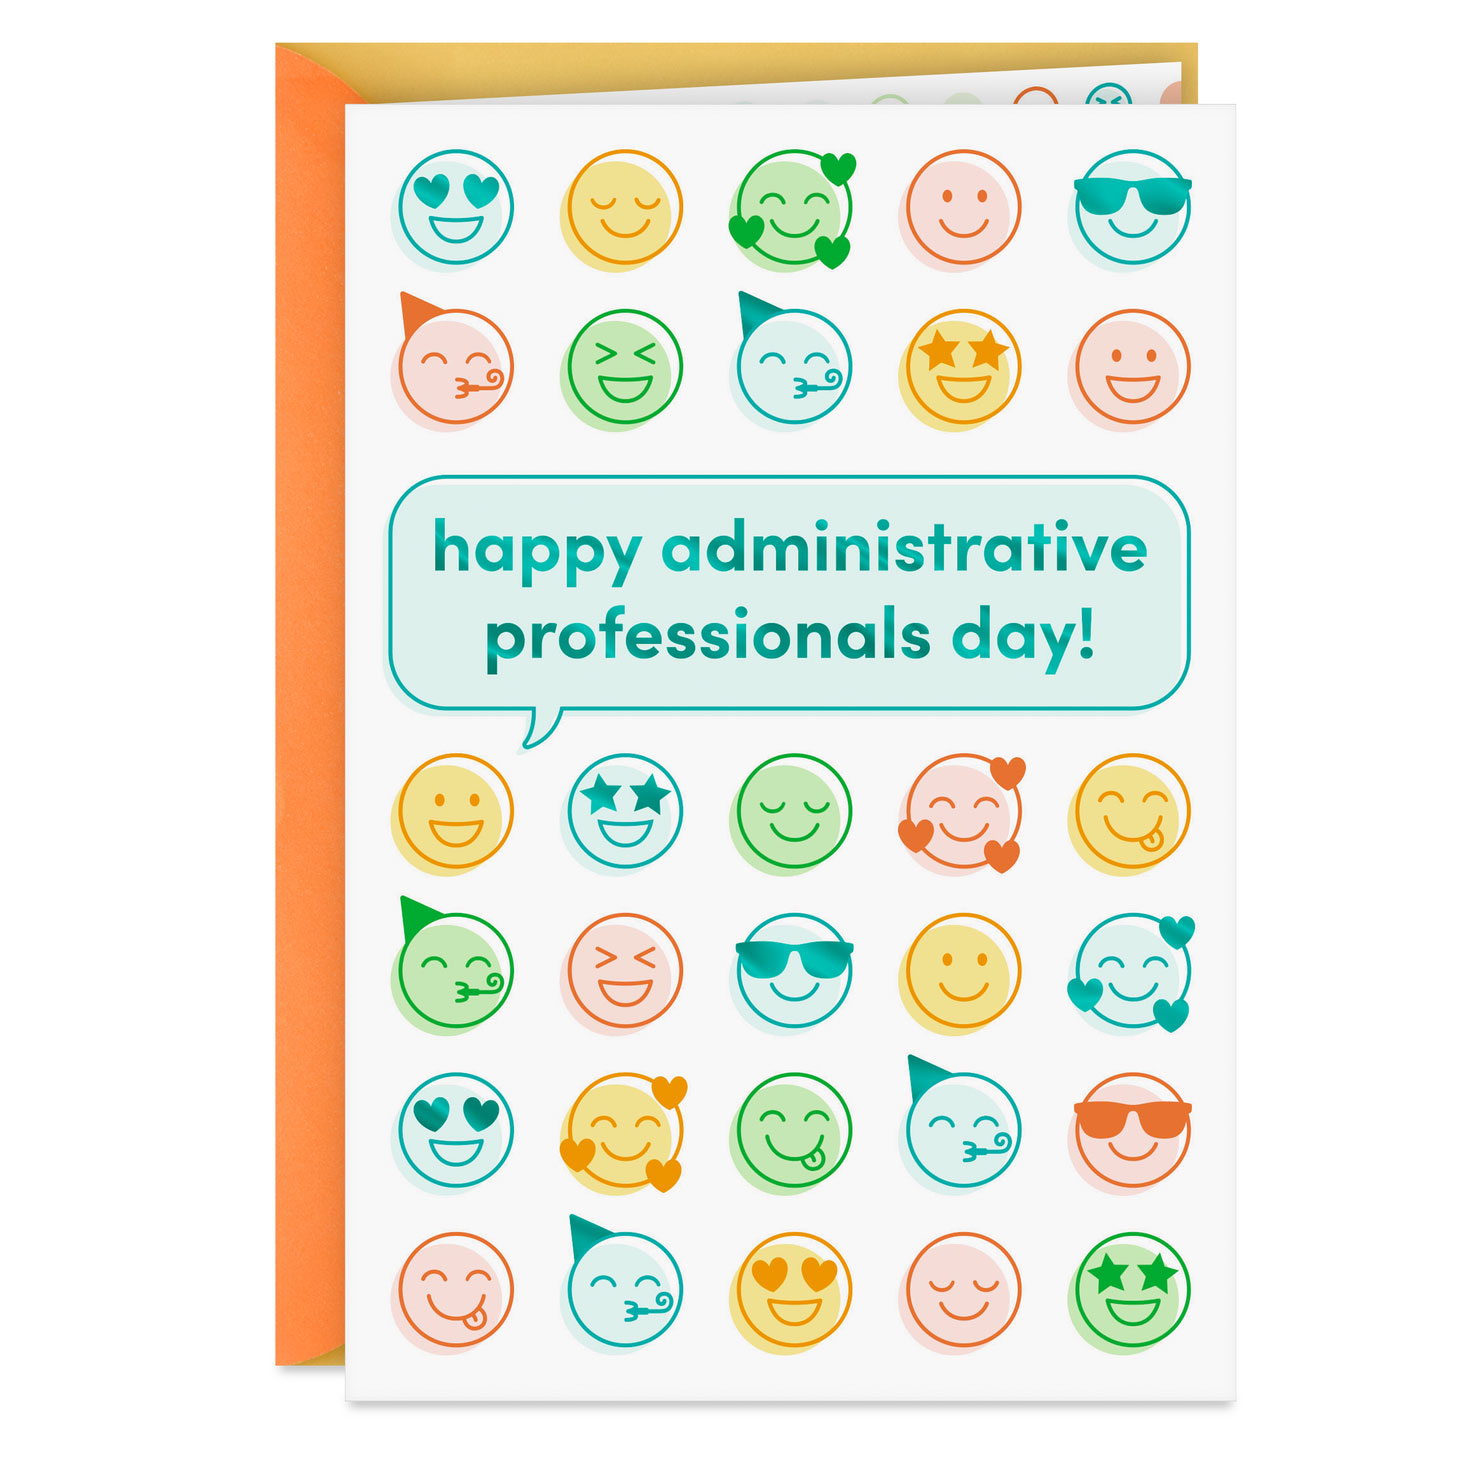 administrative assistant day